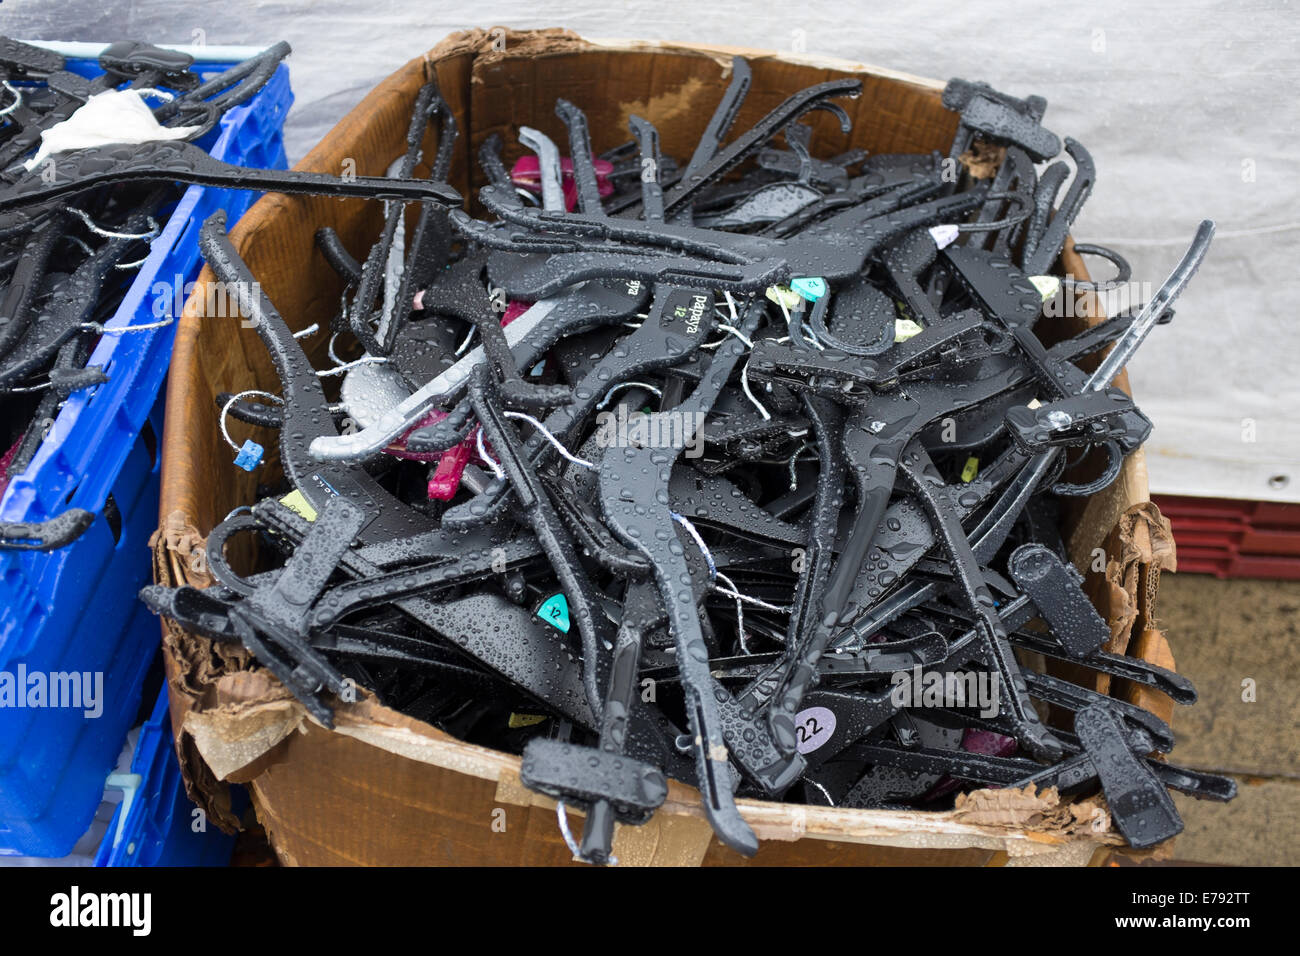 Can you recycle coat hangers?